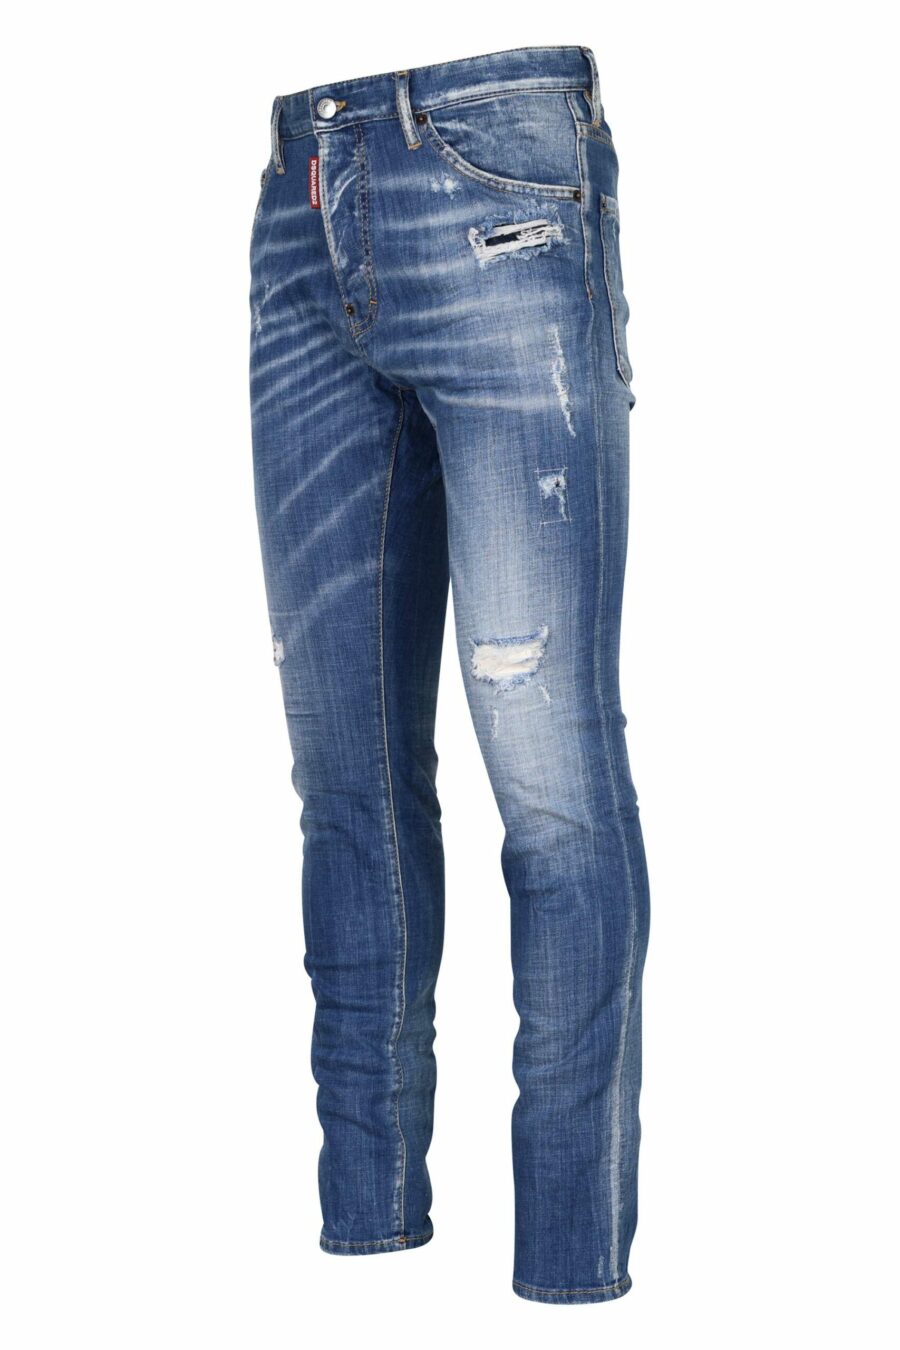 Light blue "cool guy jean" trousers with semi-slits and semi-worn - 8054148311414 1 scaled